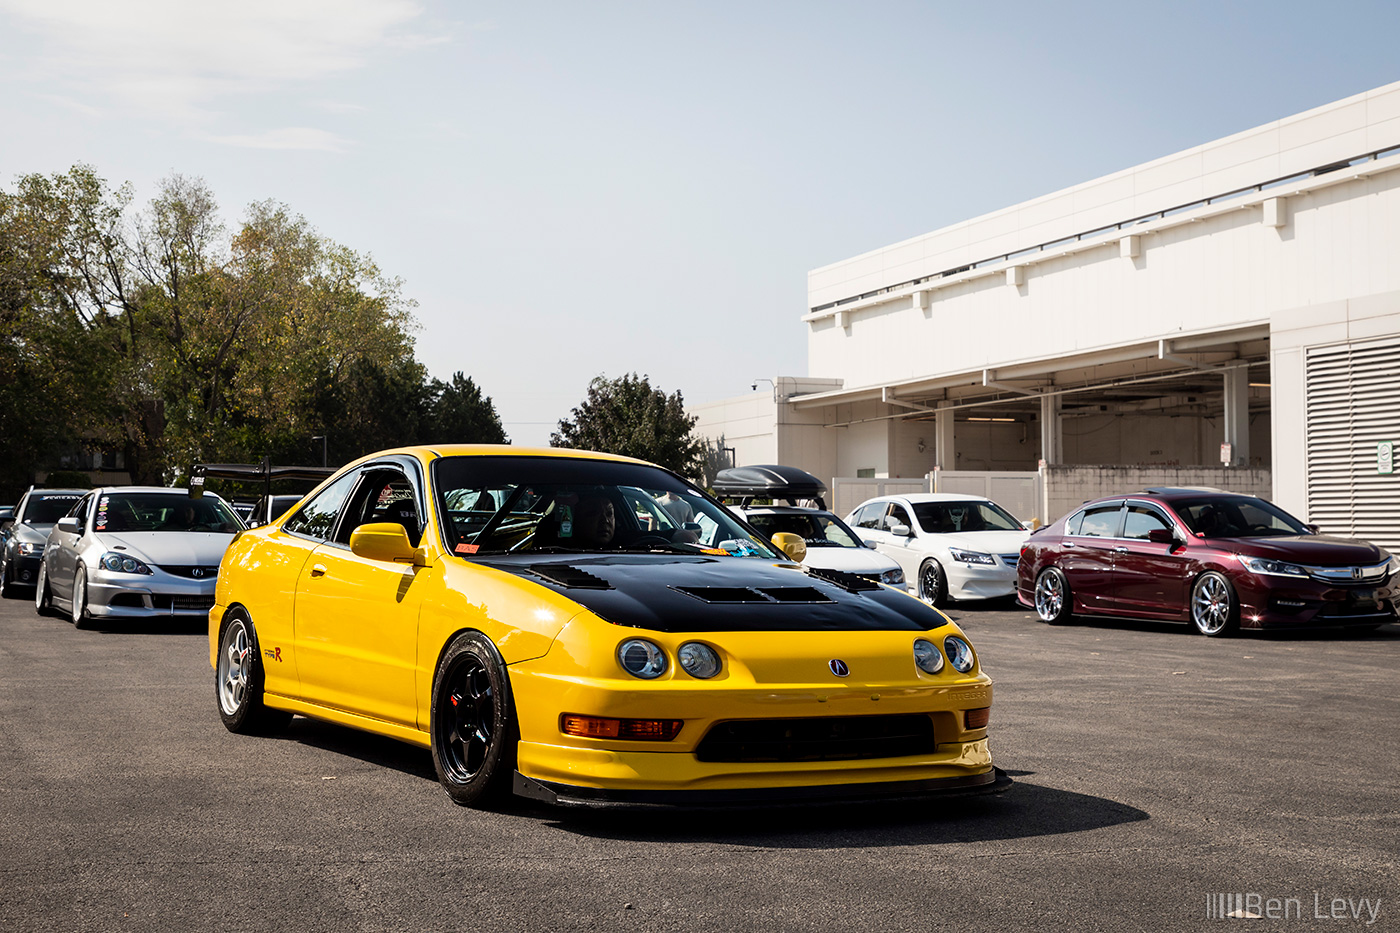 Yellow Acura Integra Waiting to Get Into Car Show